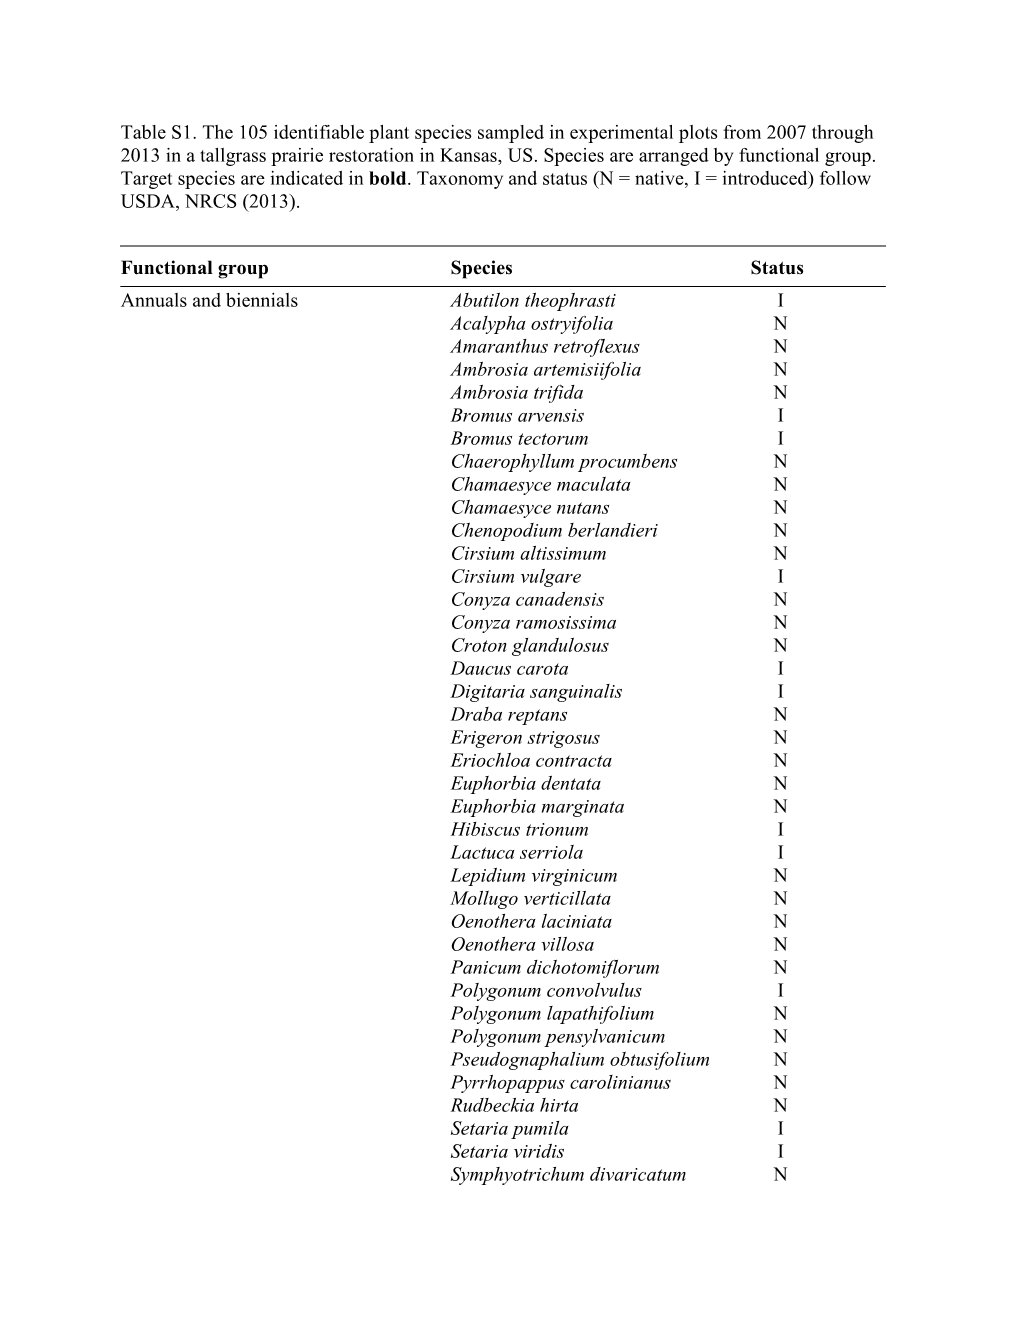 Table S1. the 105 Identifiable Plant Species Sampled in Experimental Plots from 2007 Through 2013 in a Tallgrass Prairie Restoration in Kansas, US